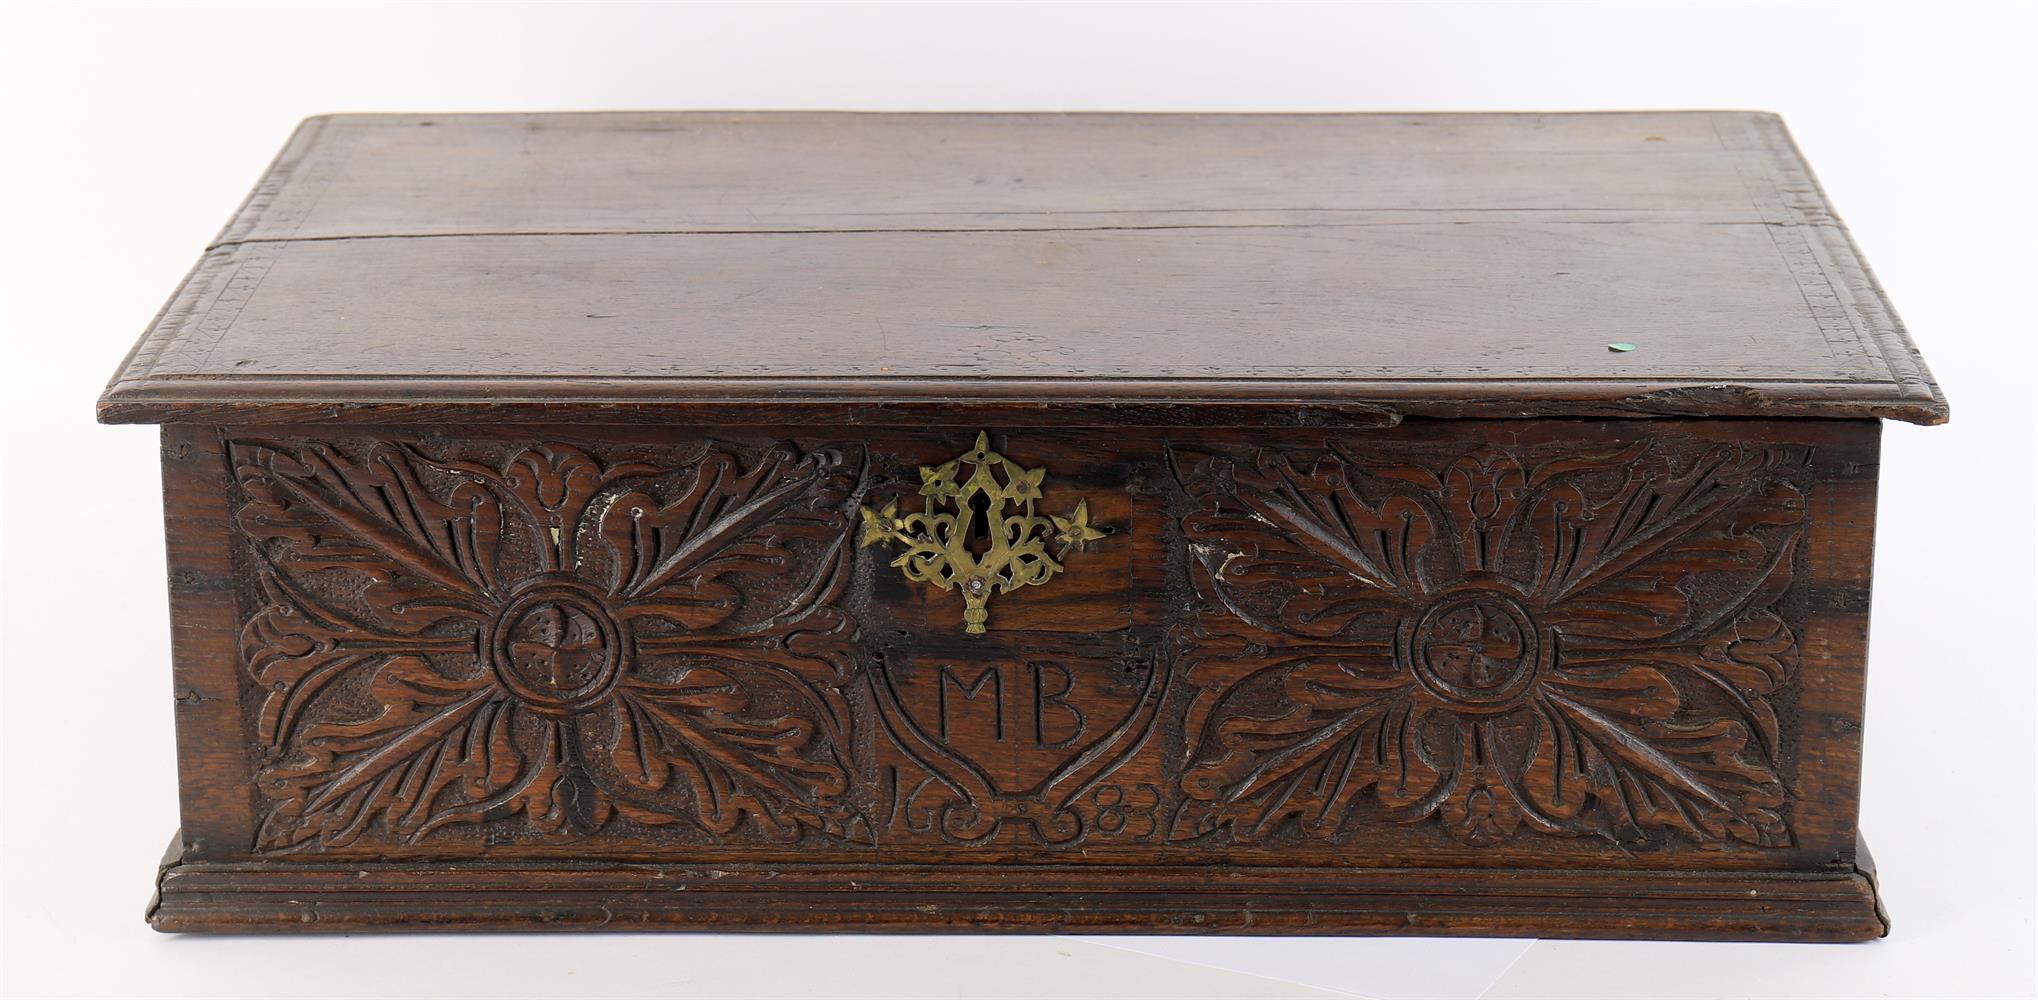 A 17th century and later oak box with carved decoration